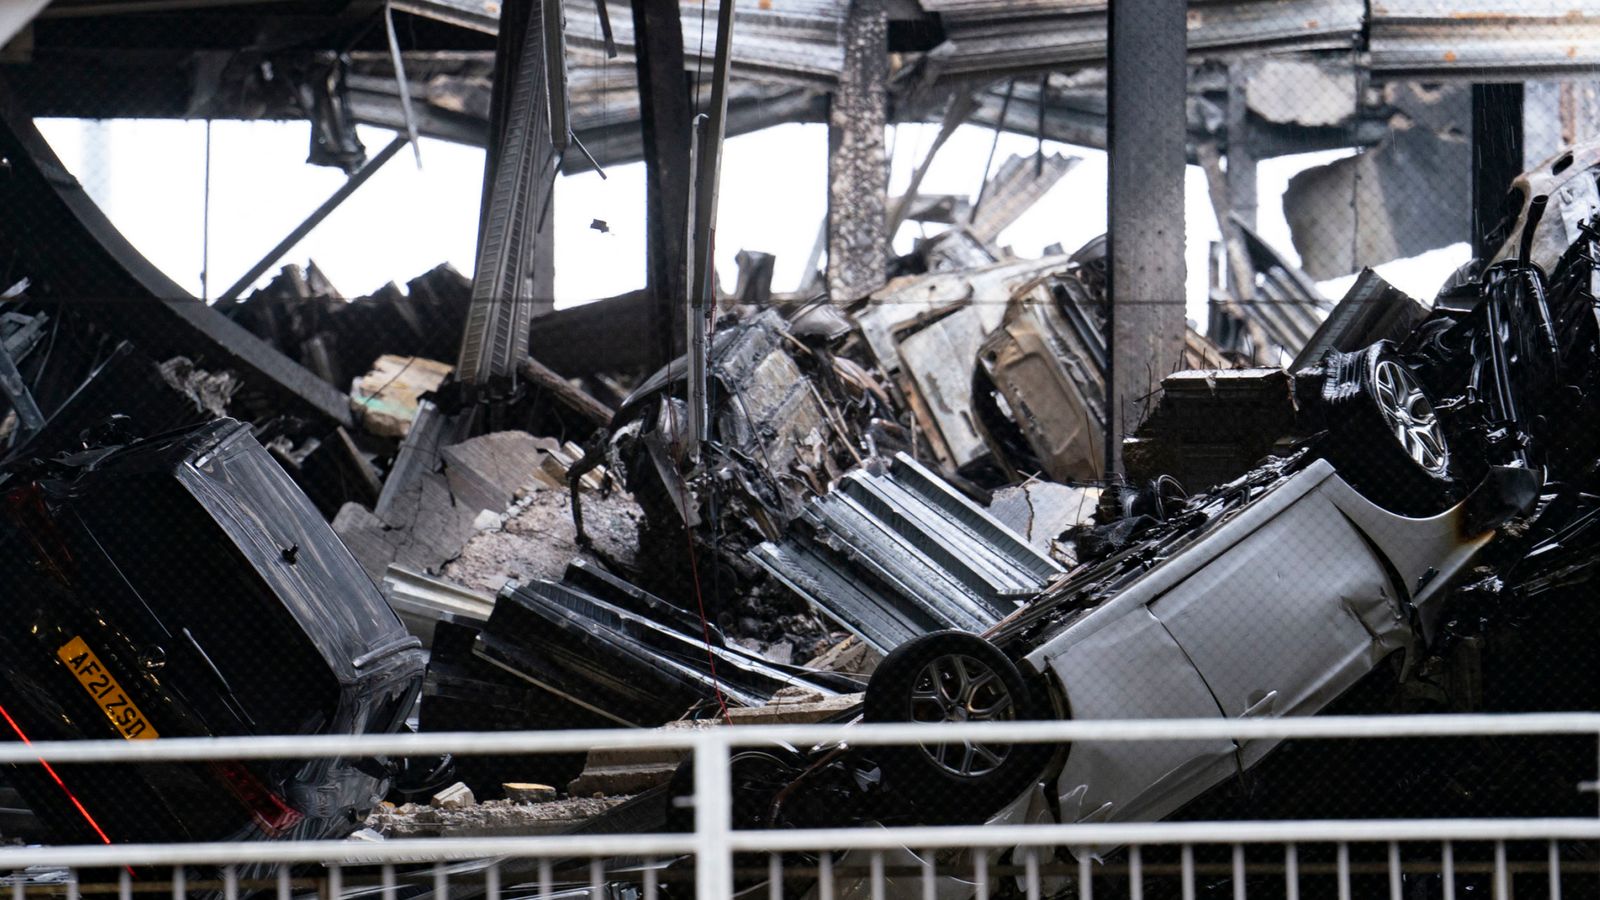 Luton Airport car park to be demolished after fire damaged hundreds of